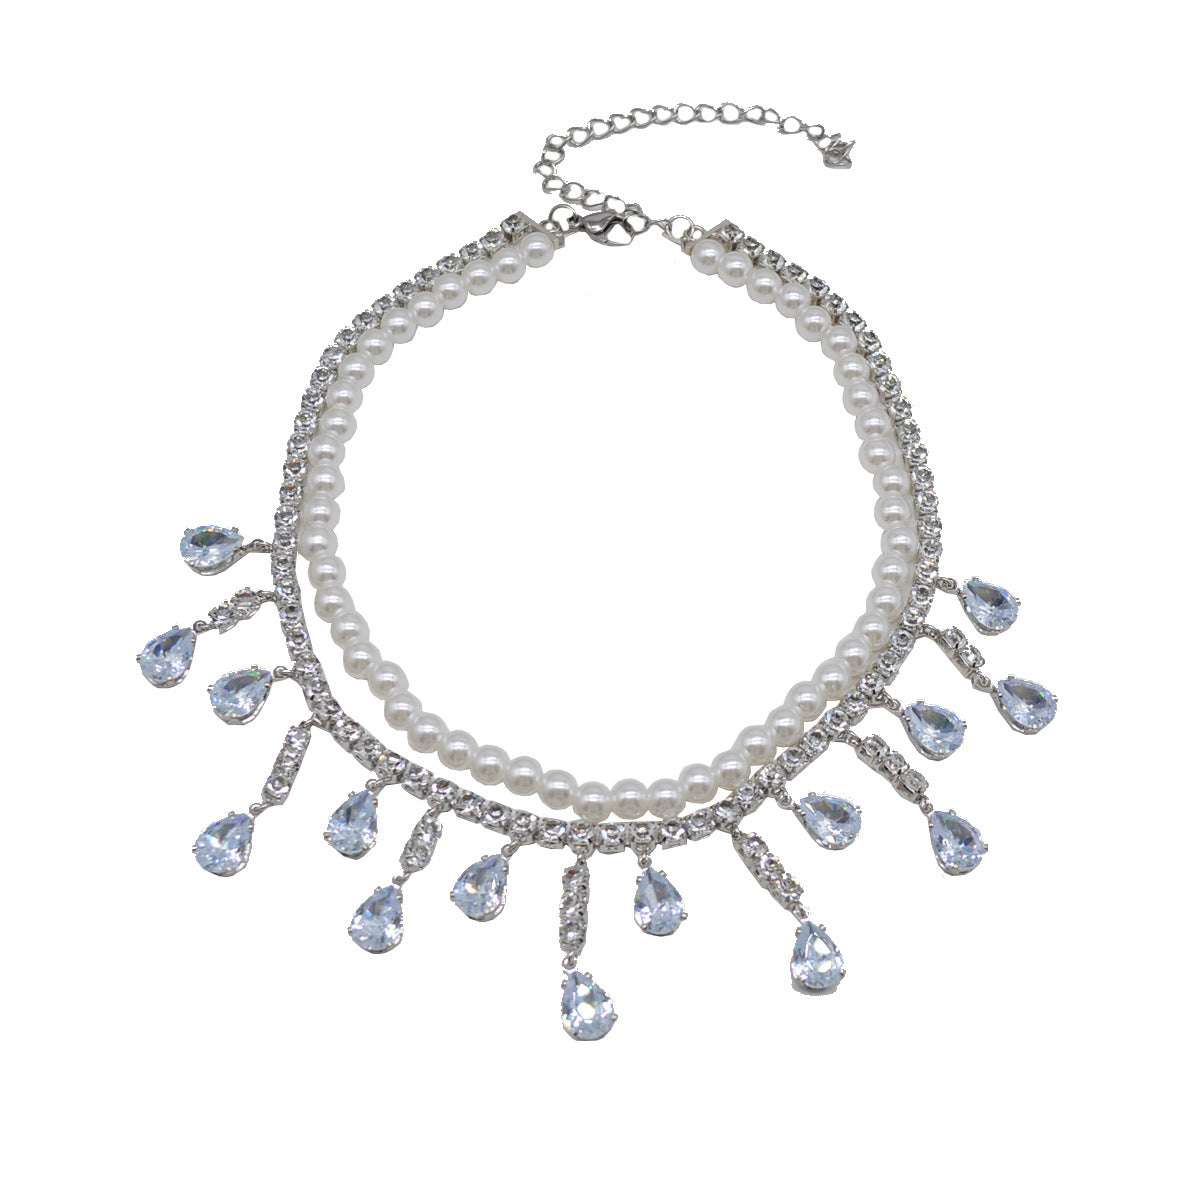 Drop Pearl Necklace, Exquisite Diamond Necklace - available at Sparq Mart